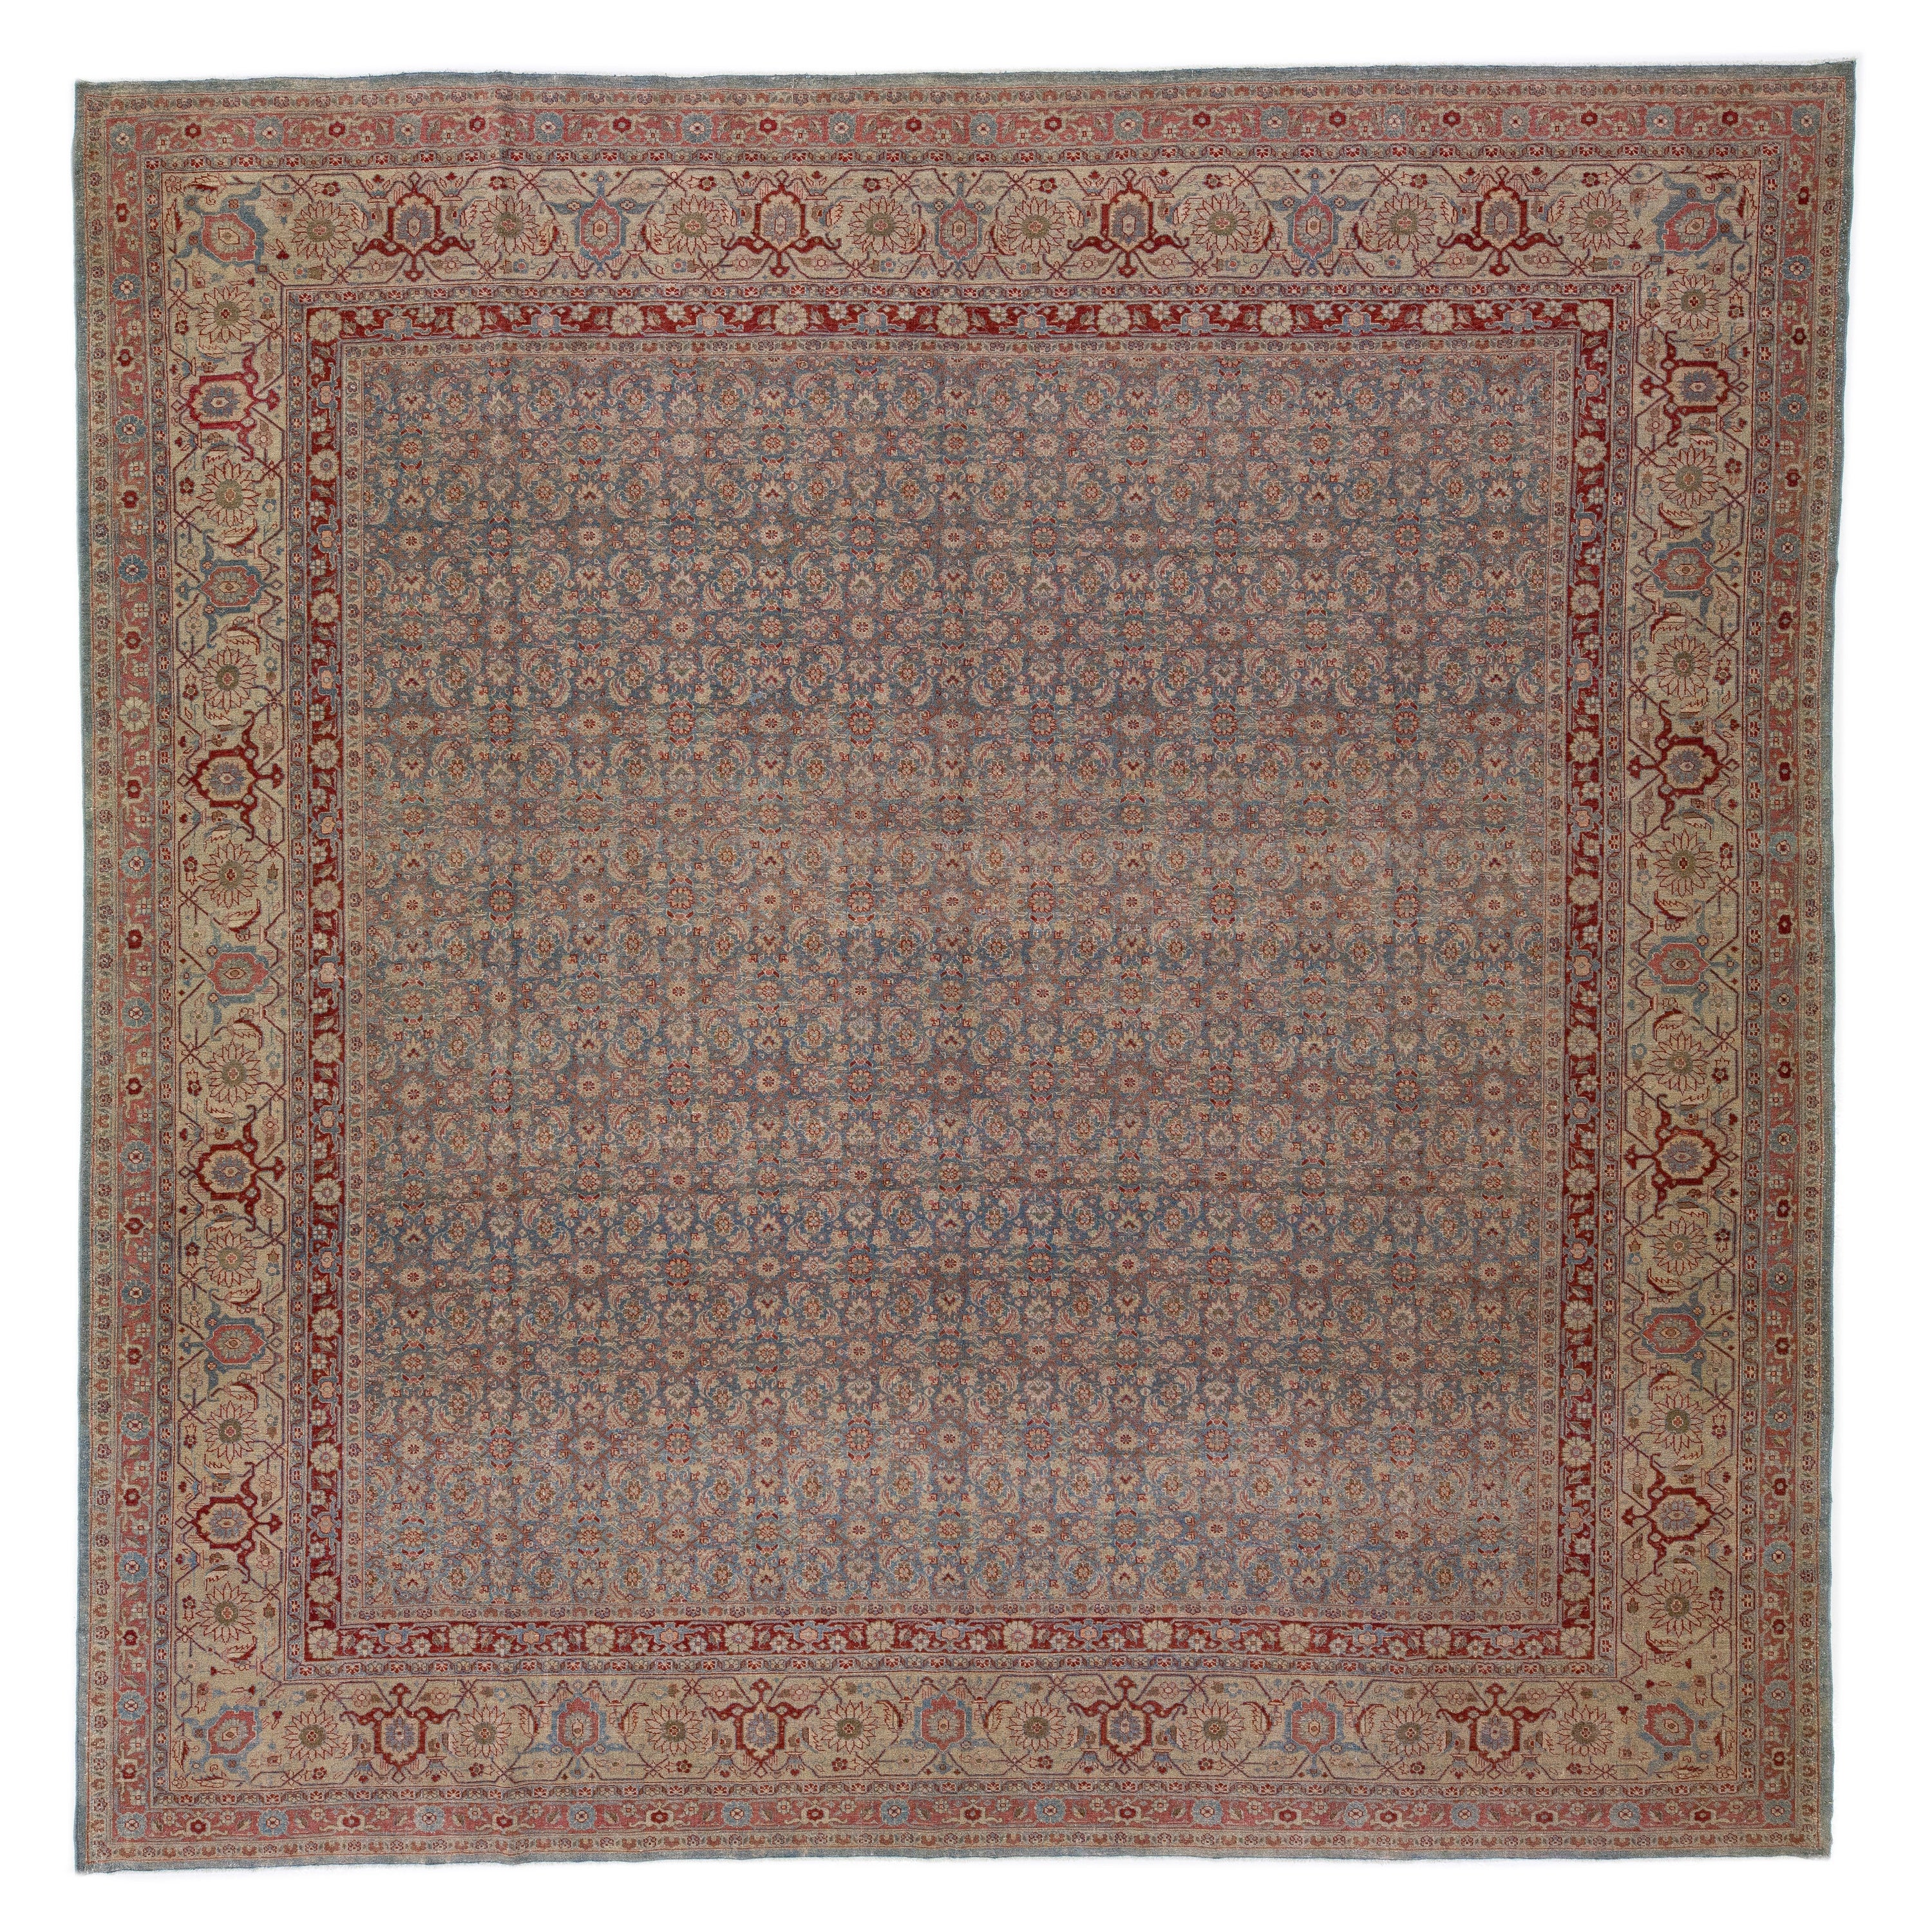 1900s Allover Persian Tabriz Square Wool Rug Handmade in Blue and Red For Sale